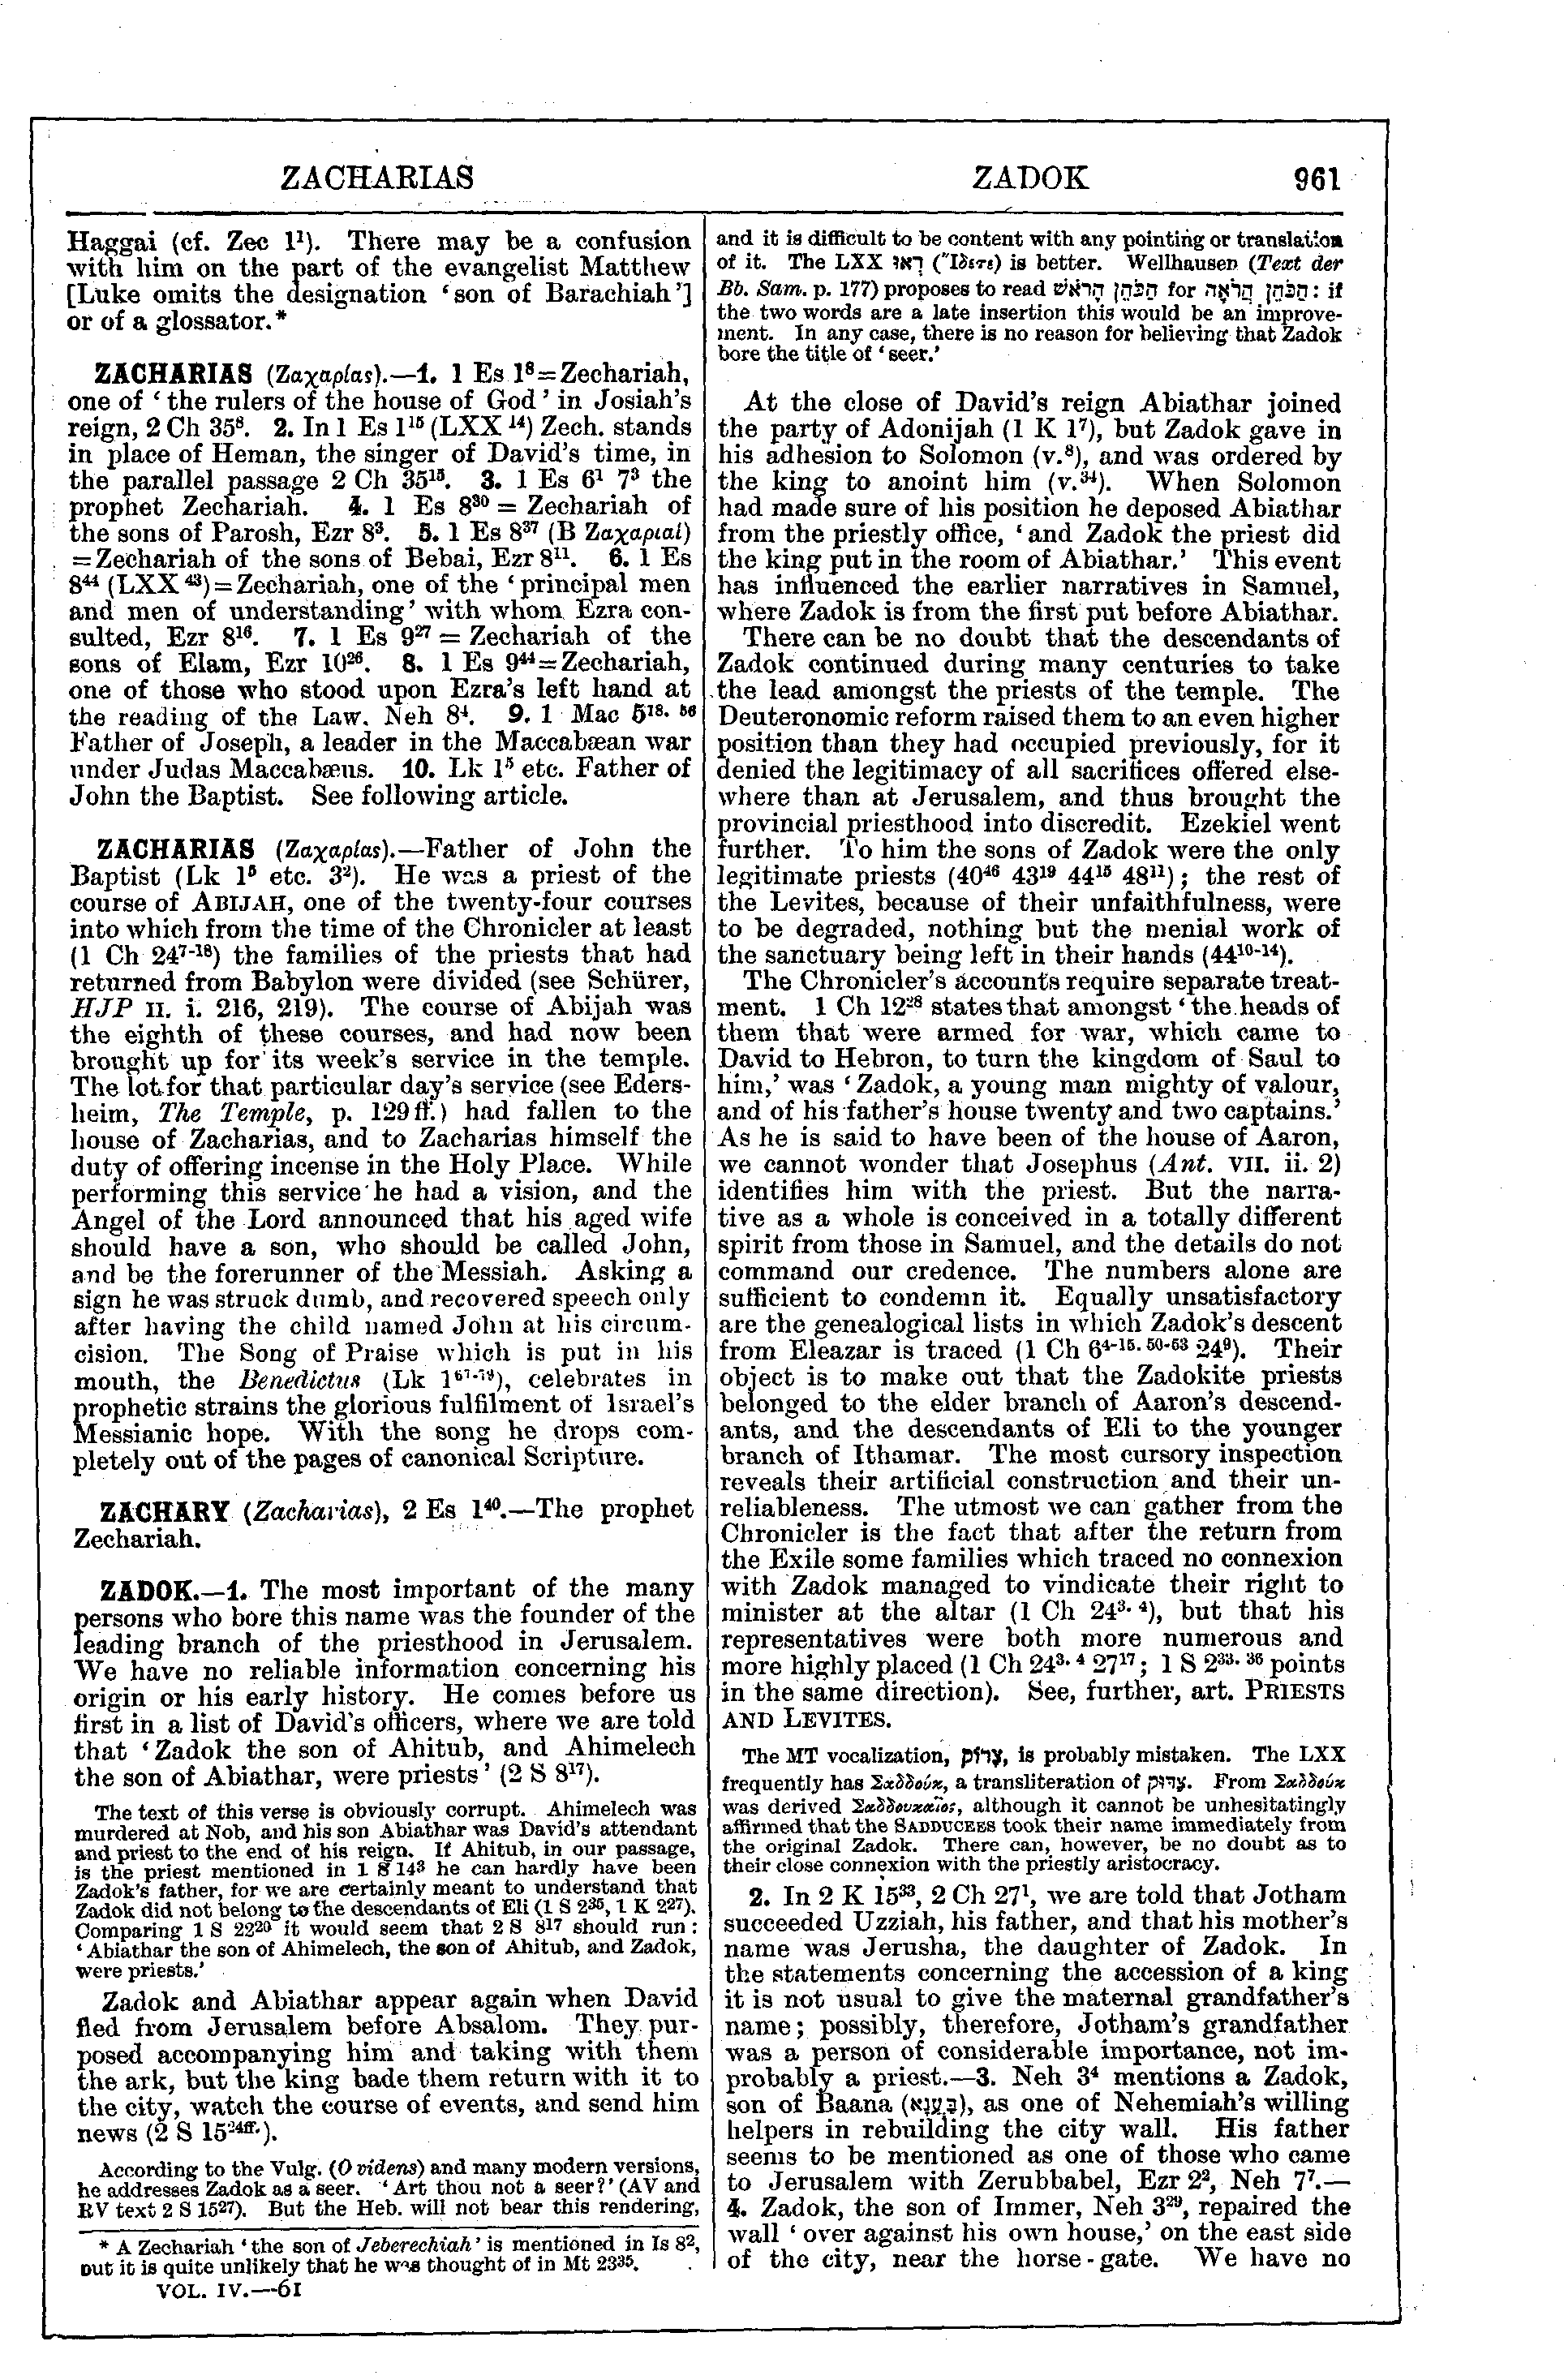 Image of page 961